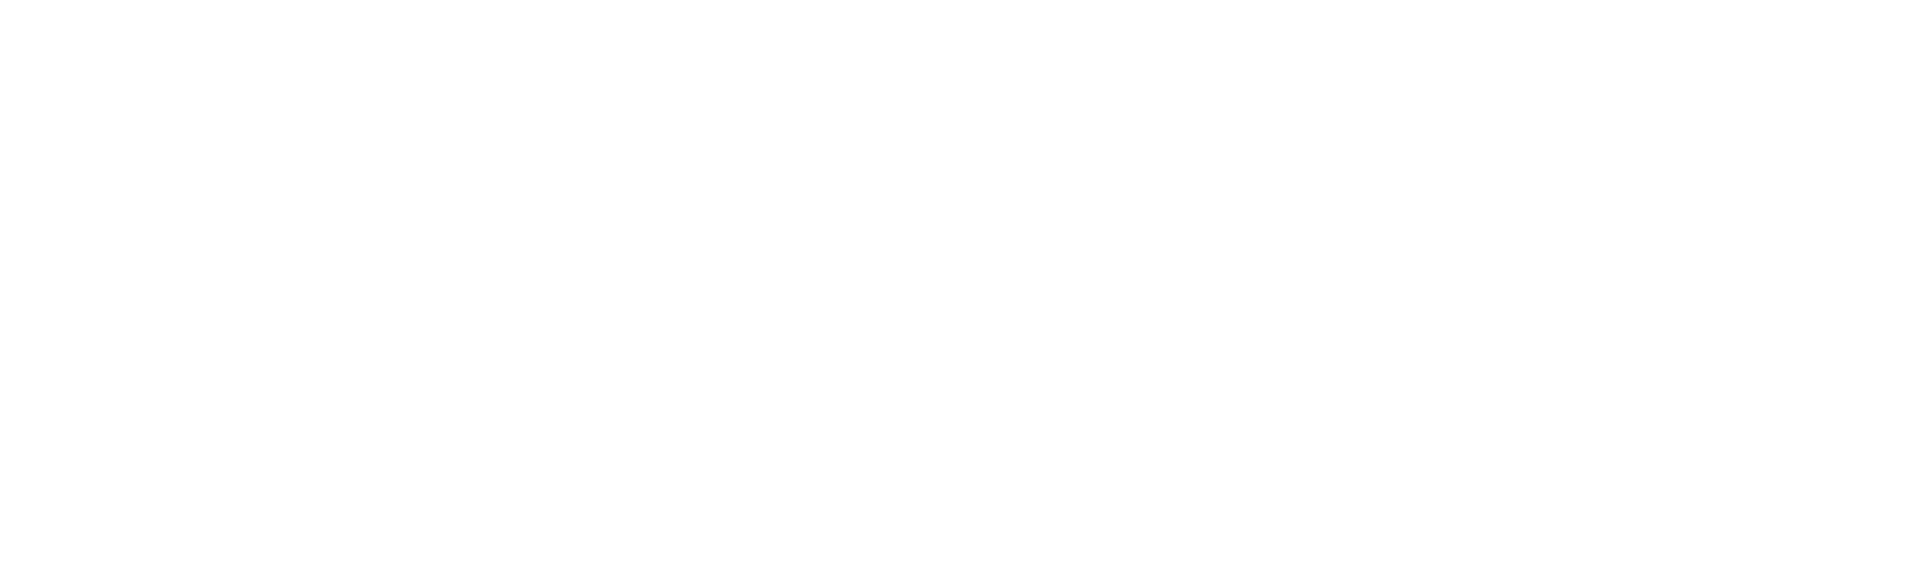 An information dsitrebution flower market Aucnet transforms the flower industry and purchasing styles.